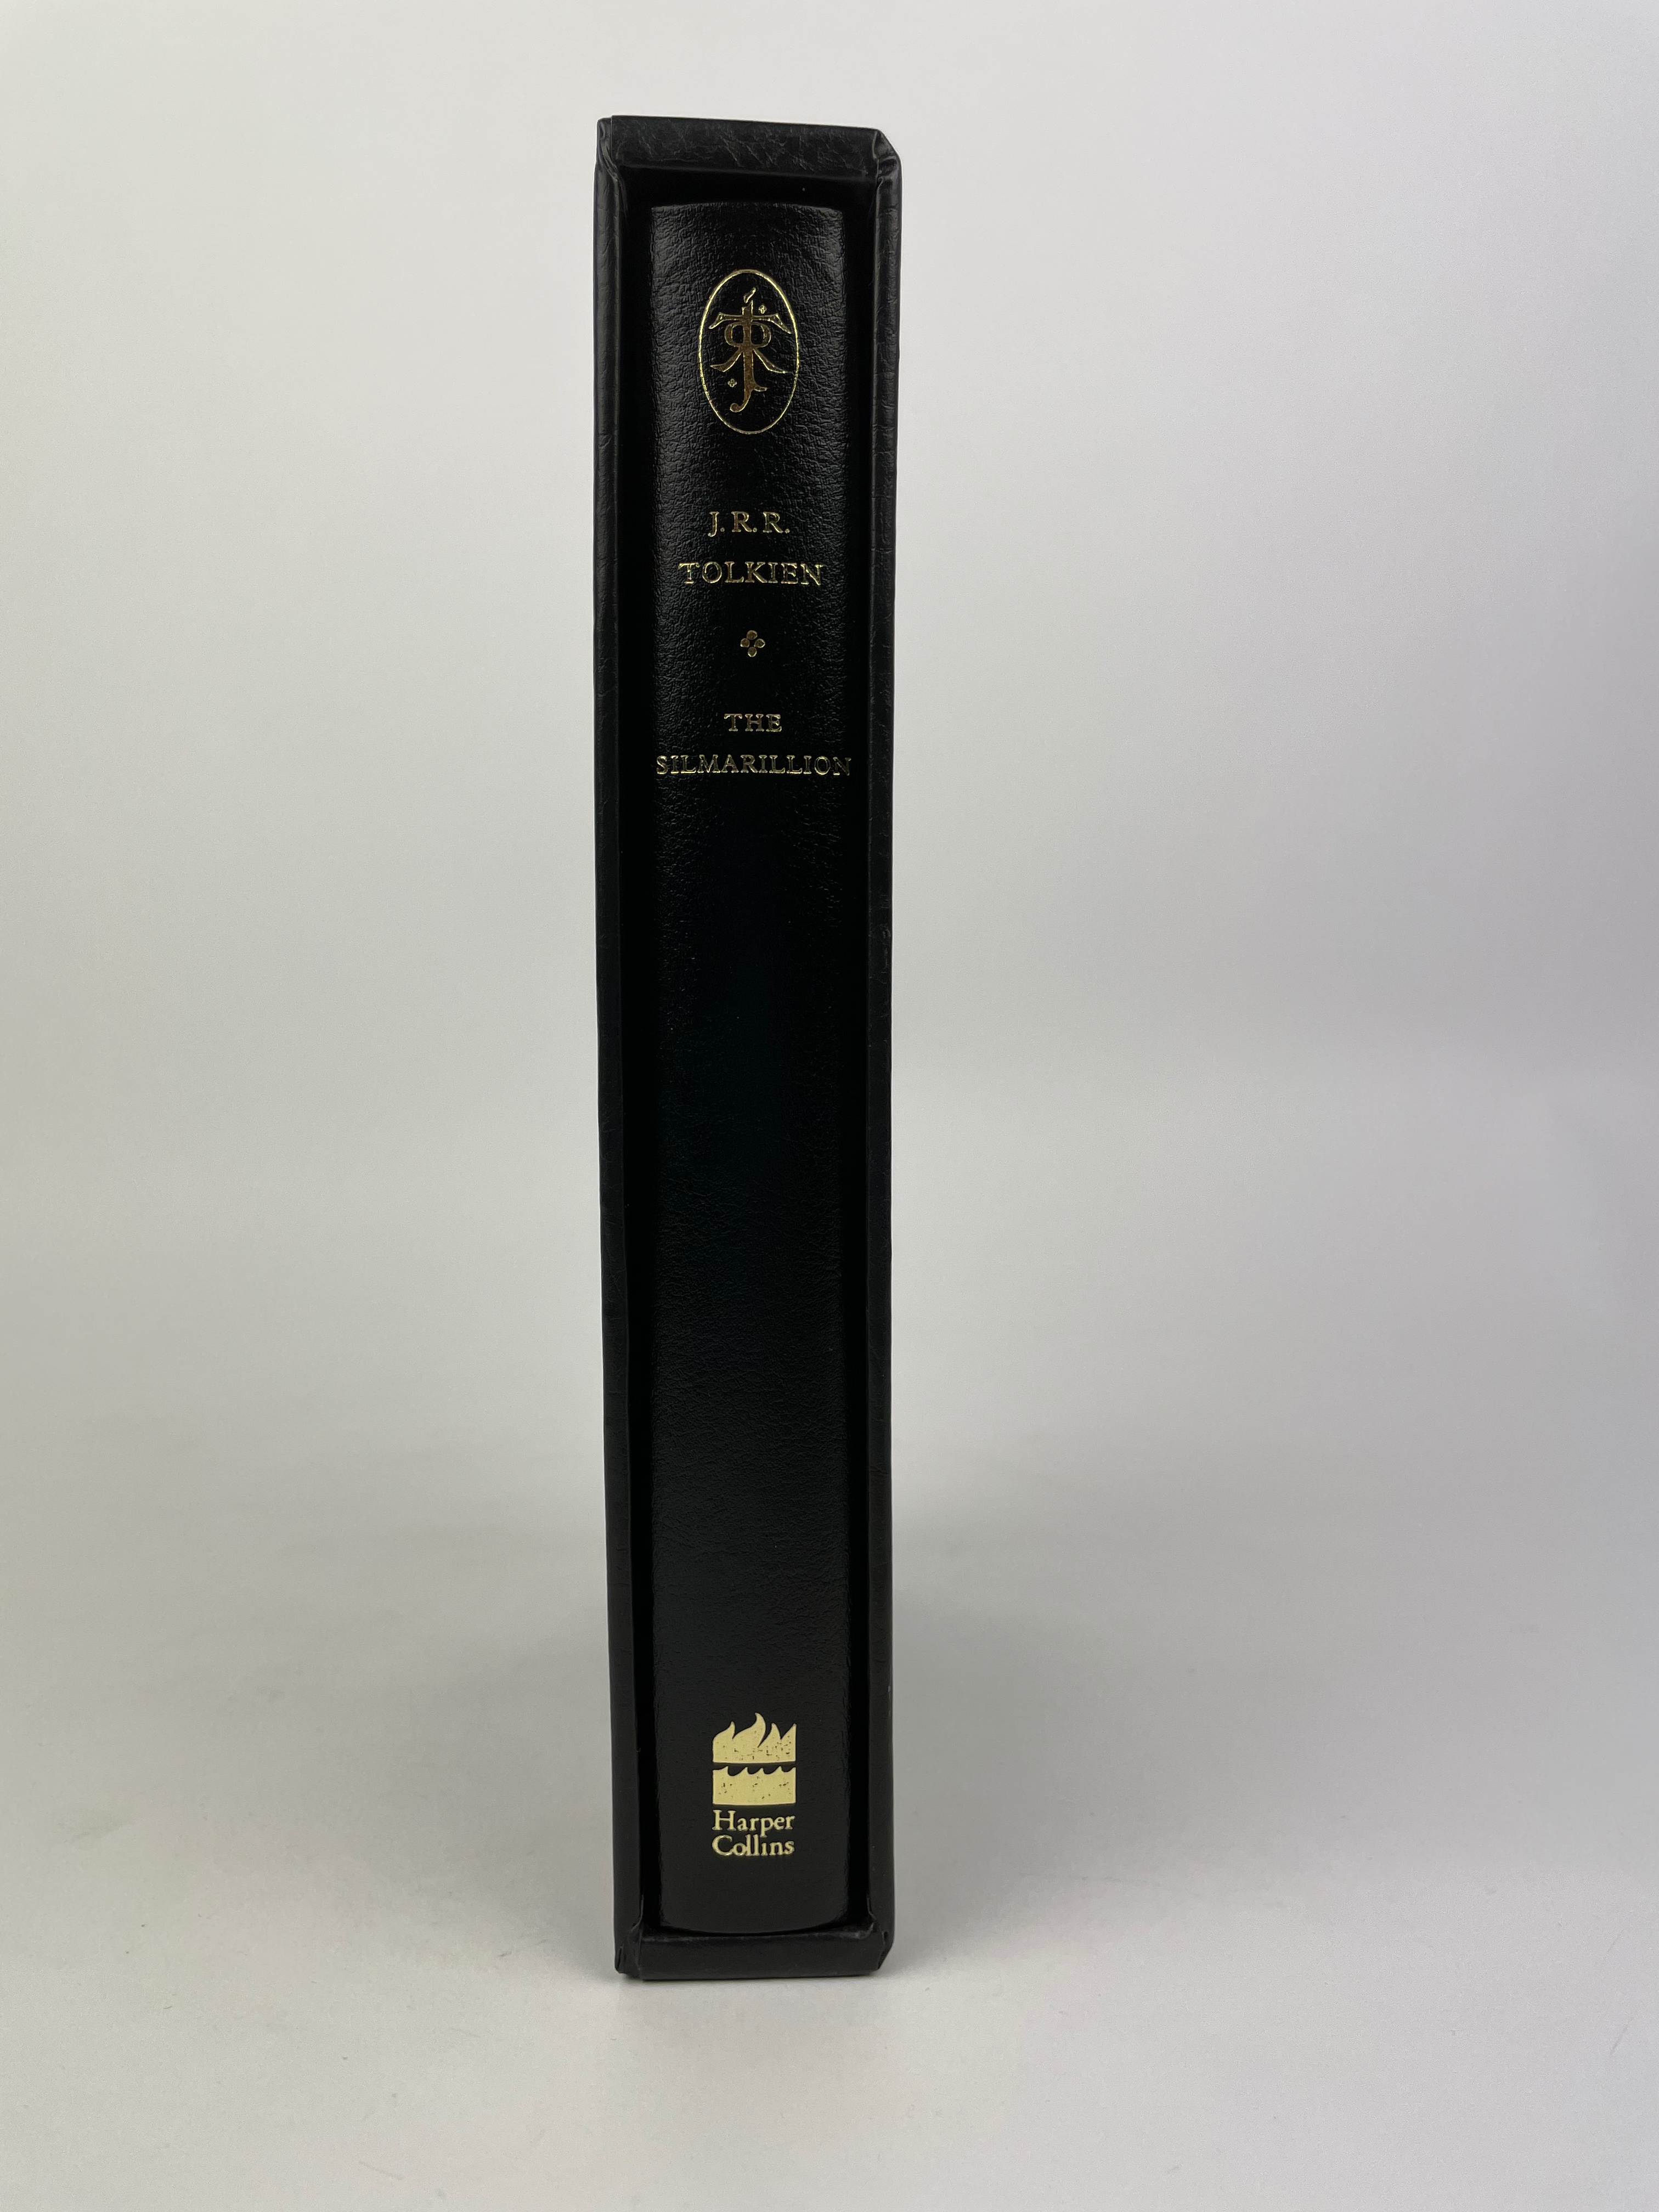 
Black Limited De Luxe edition of the Silmarillion 2002 2